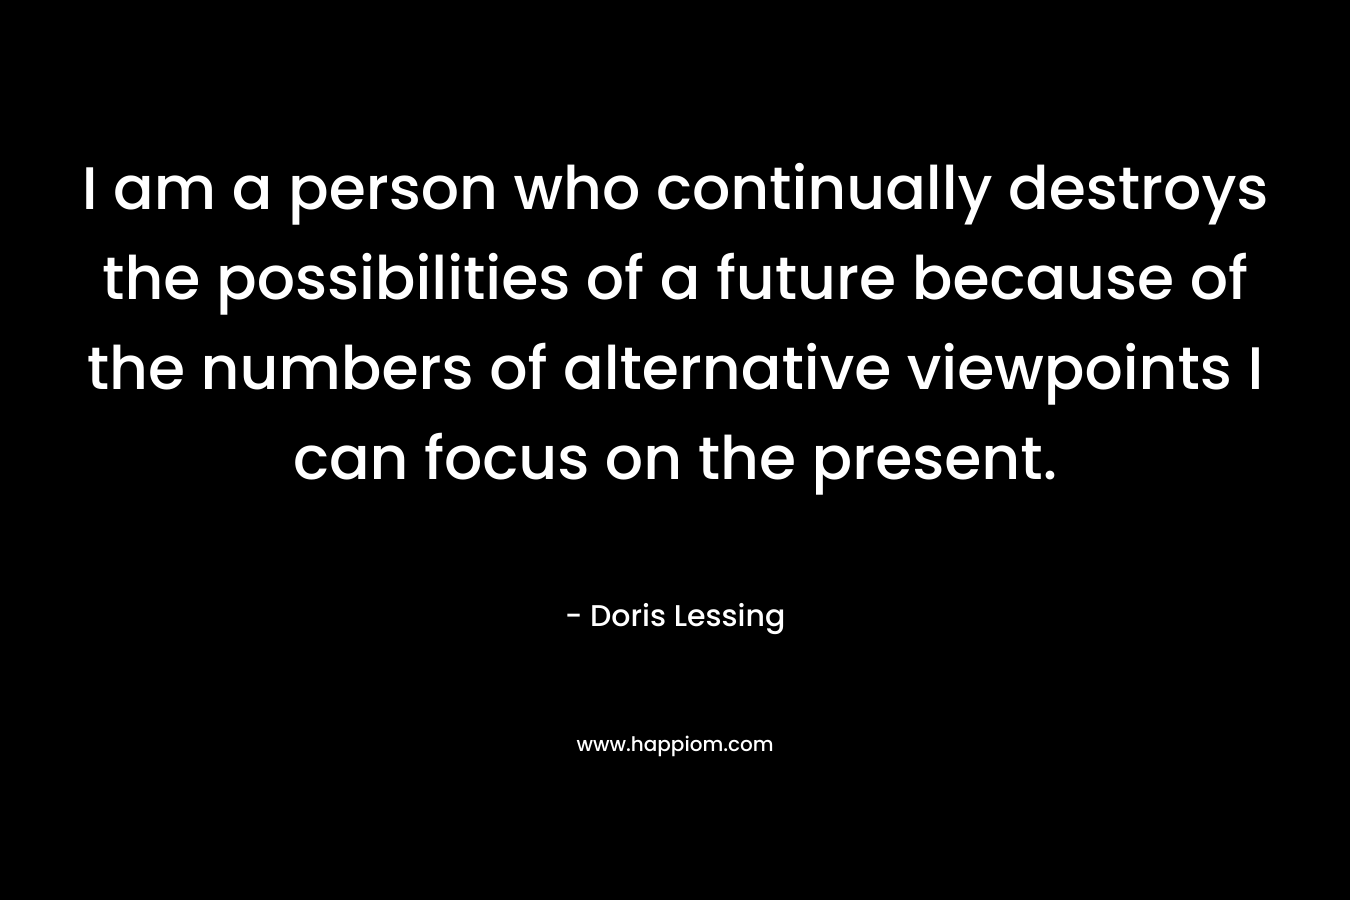 I am a person who continually destroys the possibilities of a future because of the numbers of alternative viewpoints I can focus on the present.